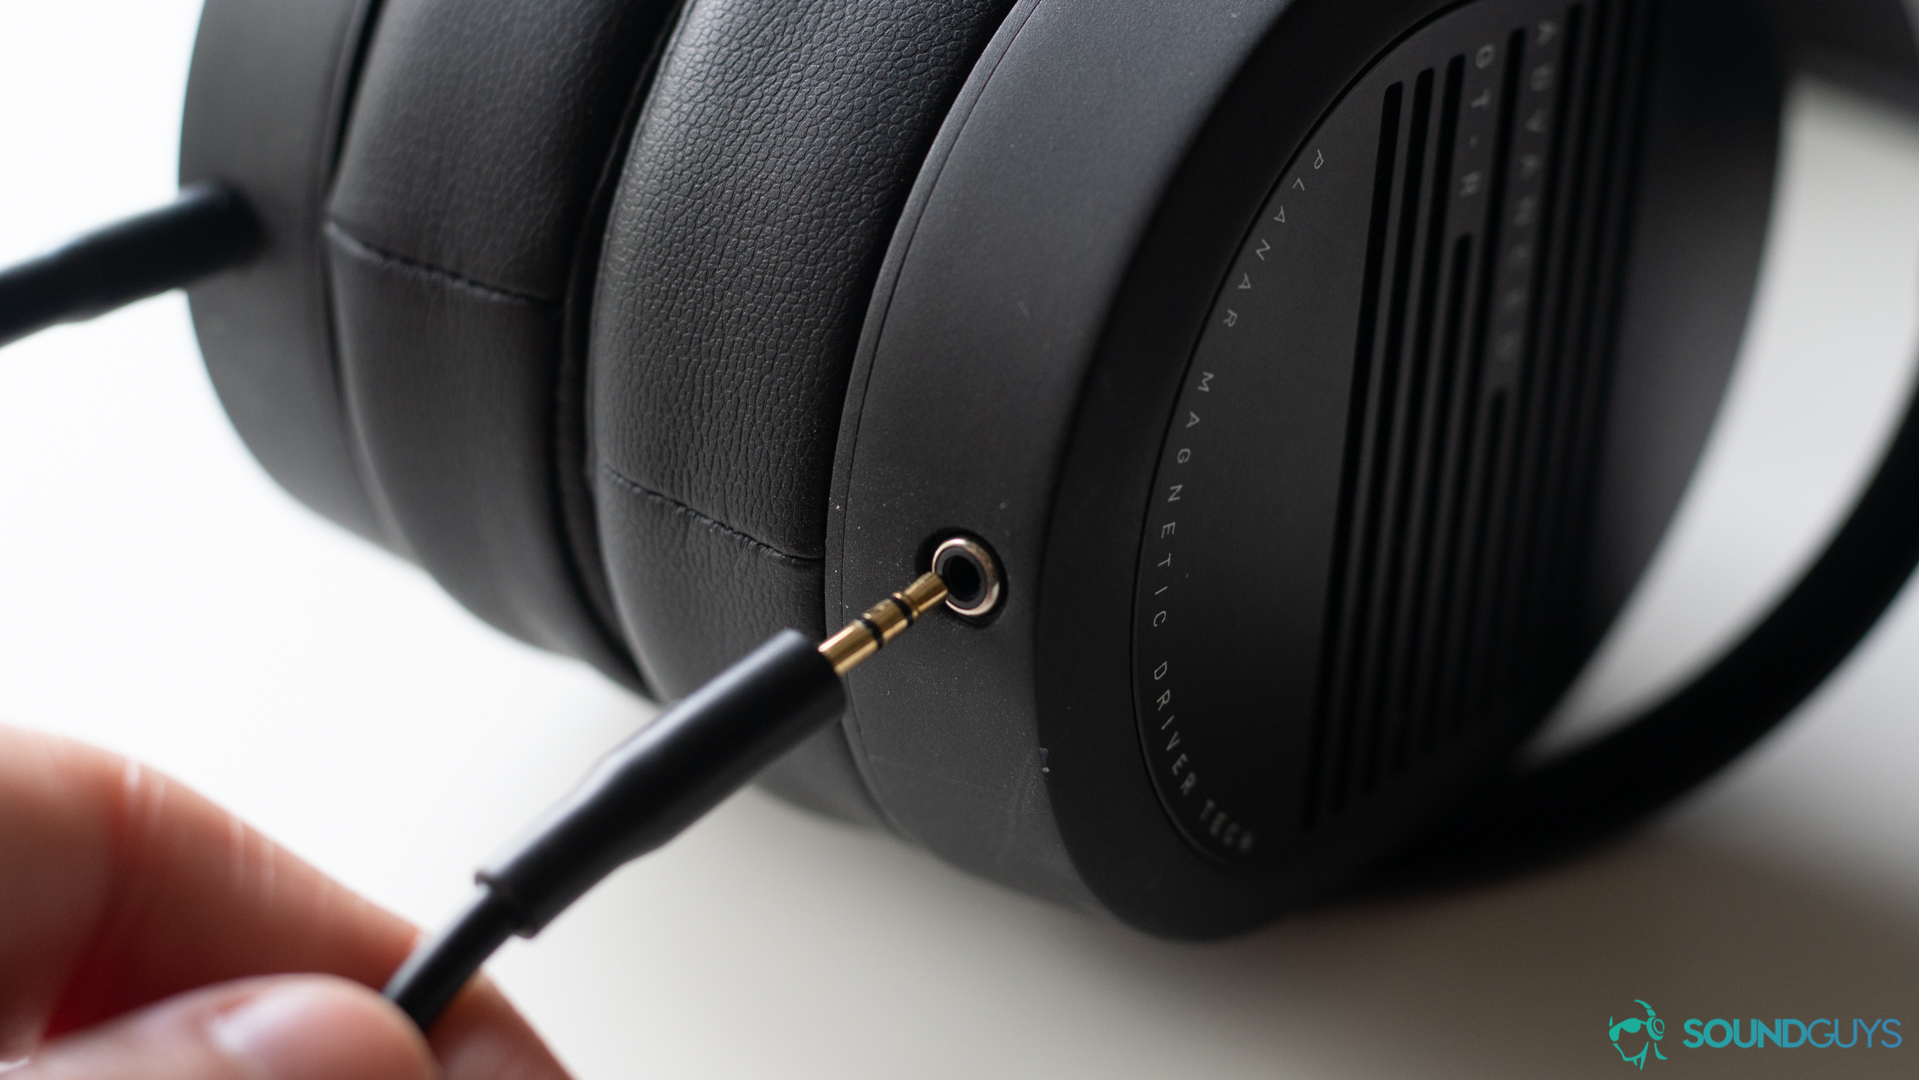 ADV.Sound GT-R review: Plugging in the 2.5mm jack into the bottom of the right ear cup.